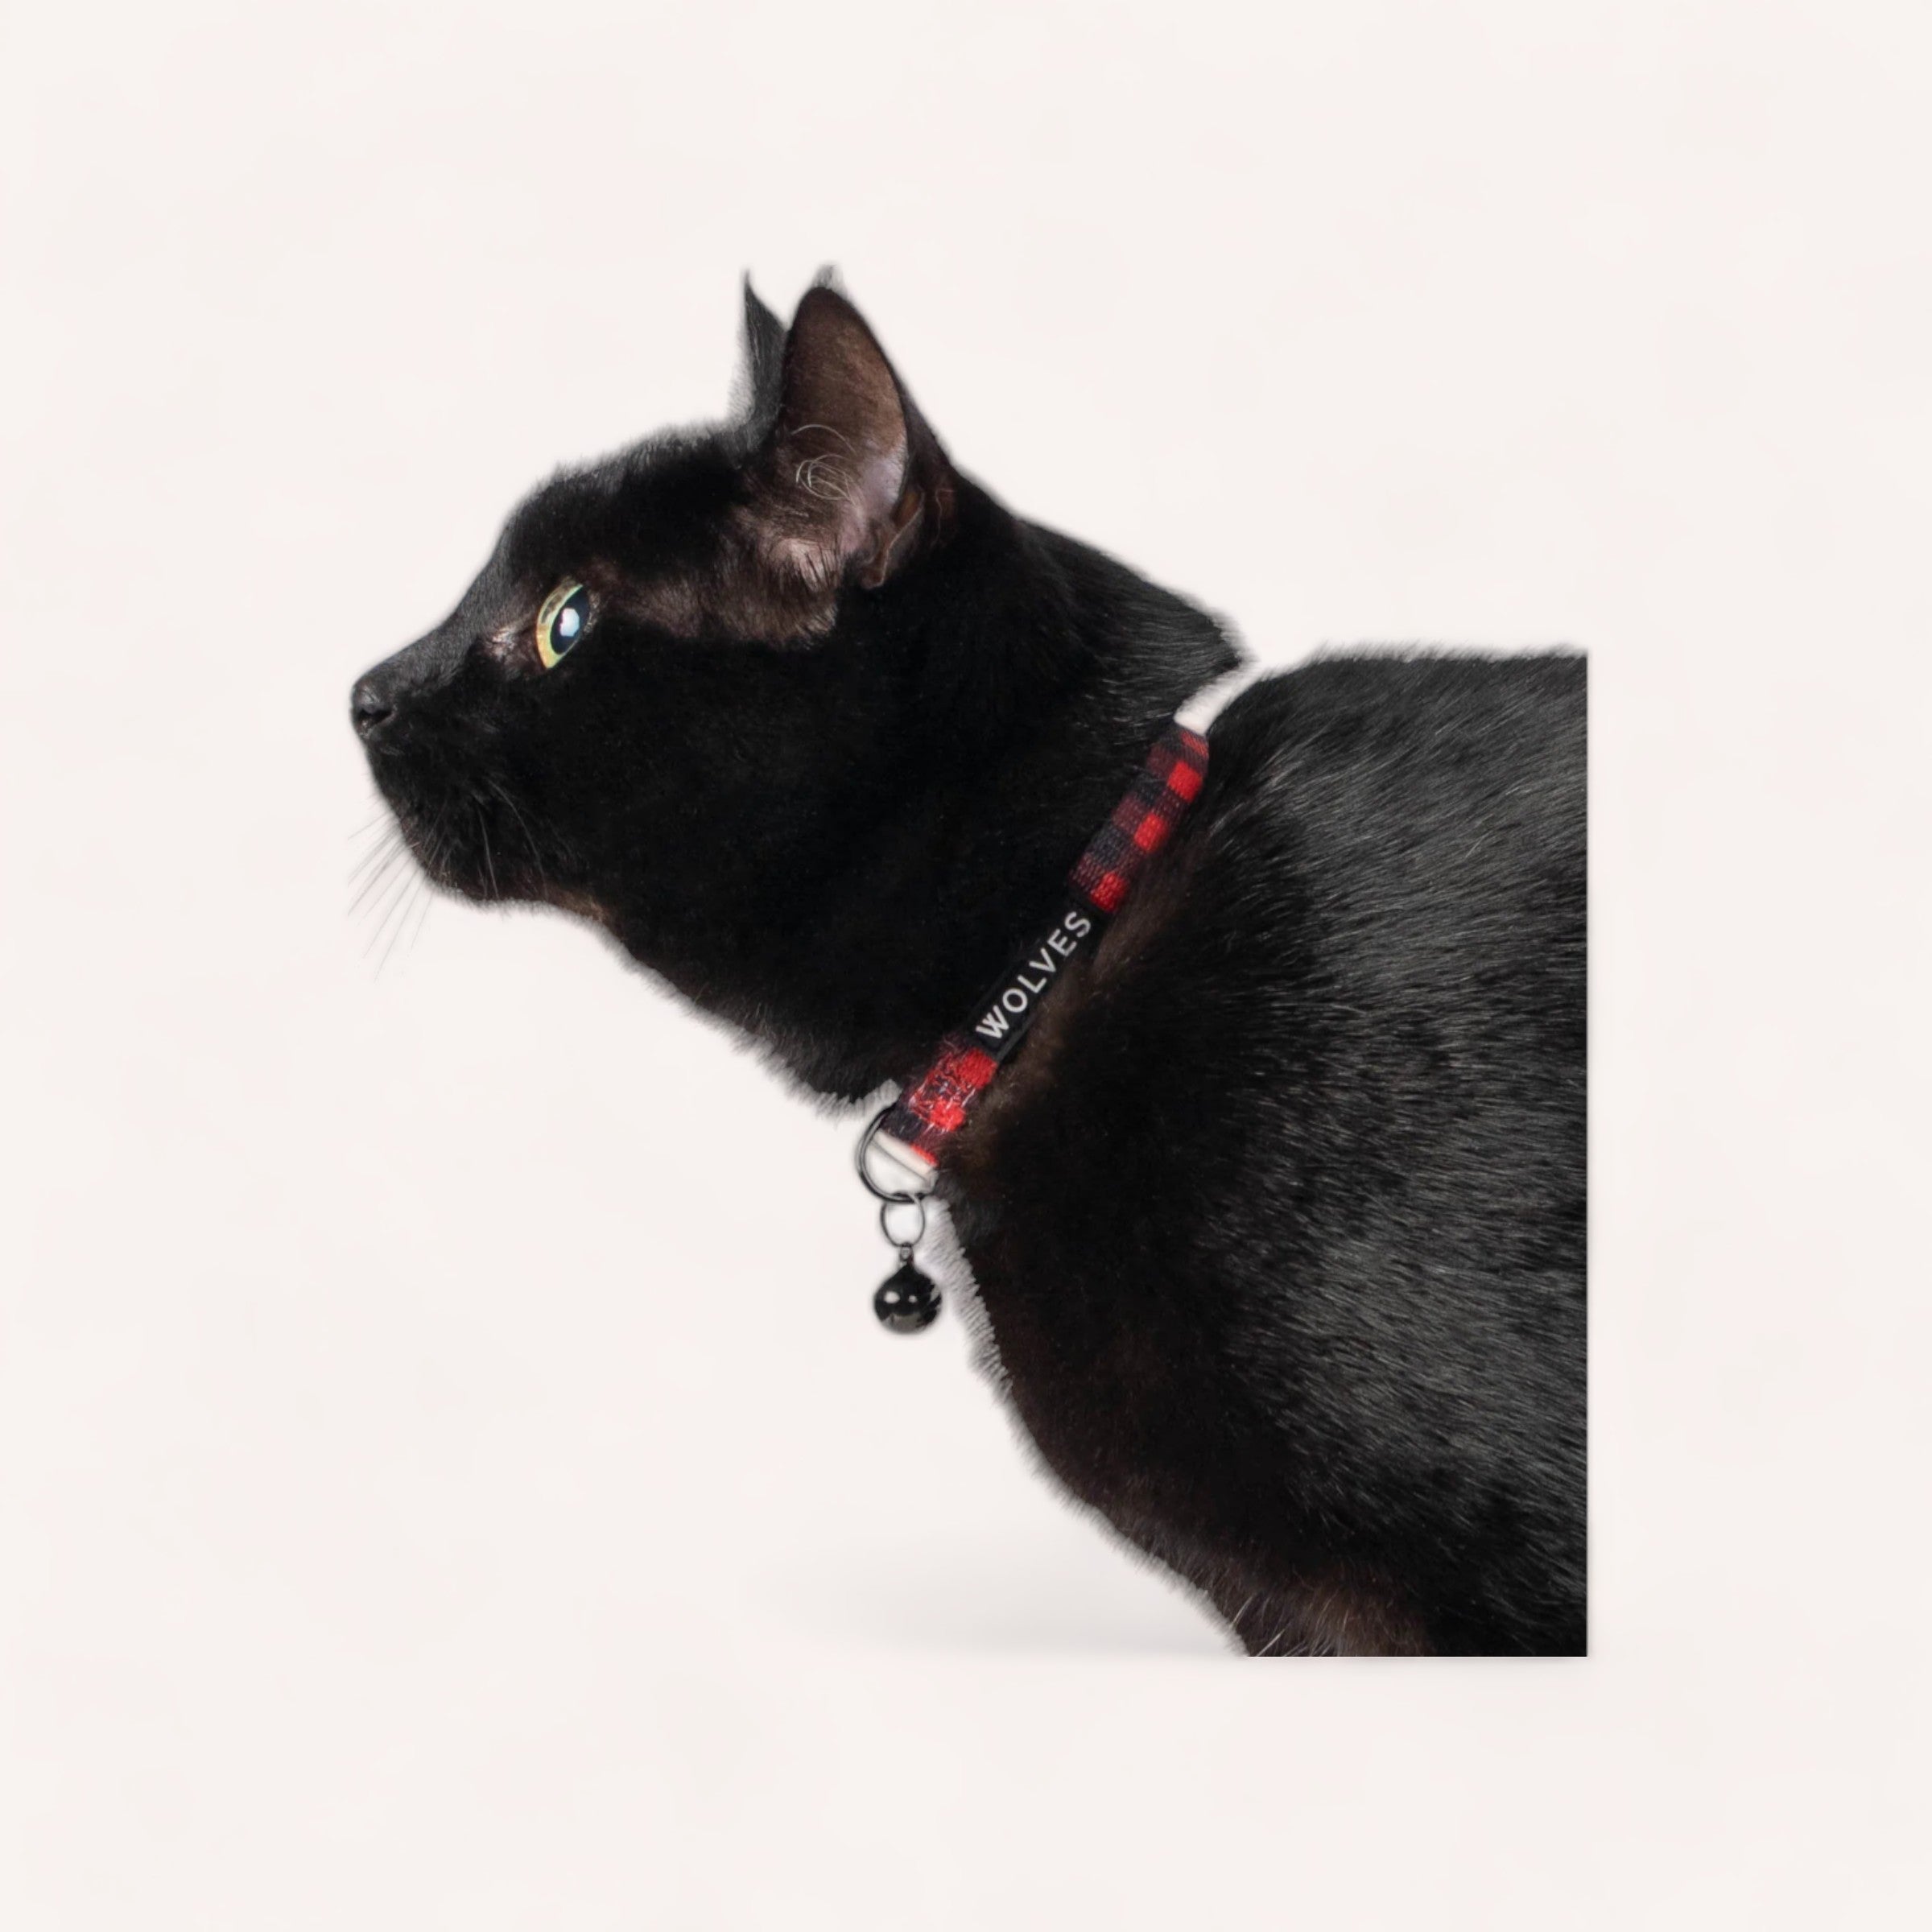 A sleek black cat with a red Buffalo Cat Collar by Wolves of Wellington gazes attentively to the side against a light background.